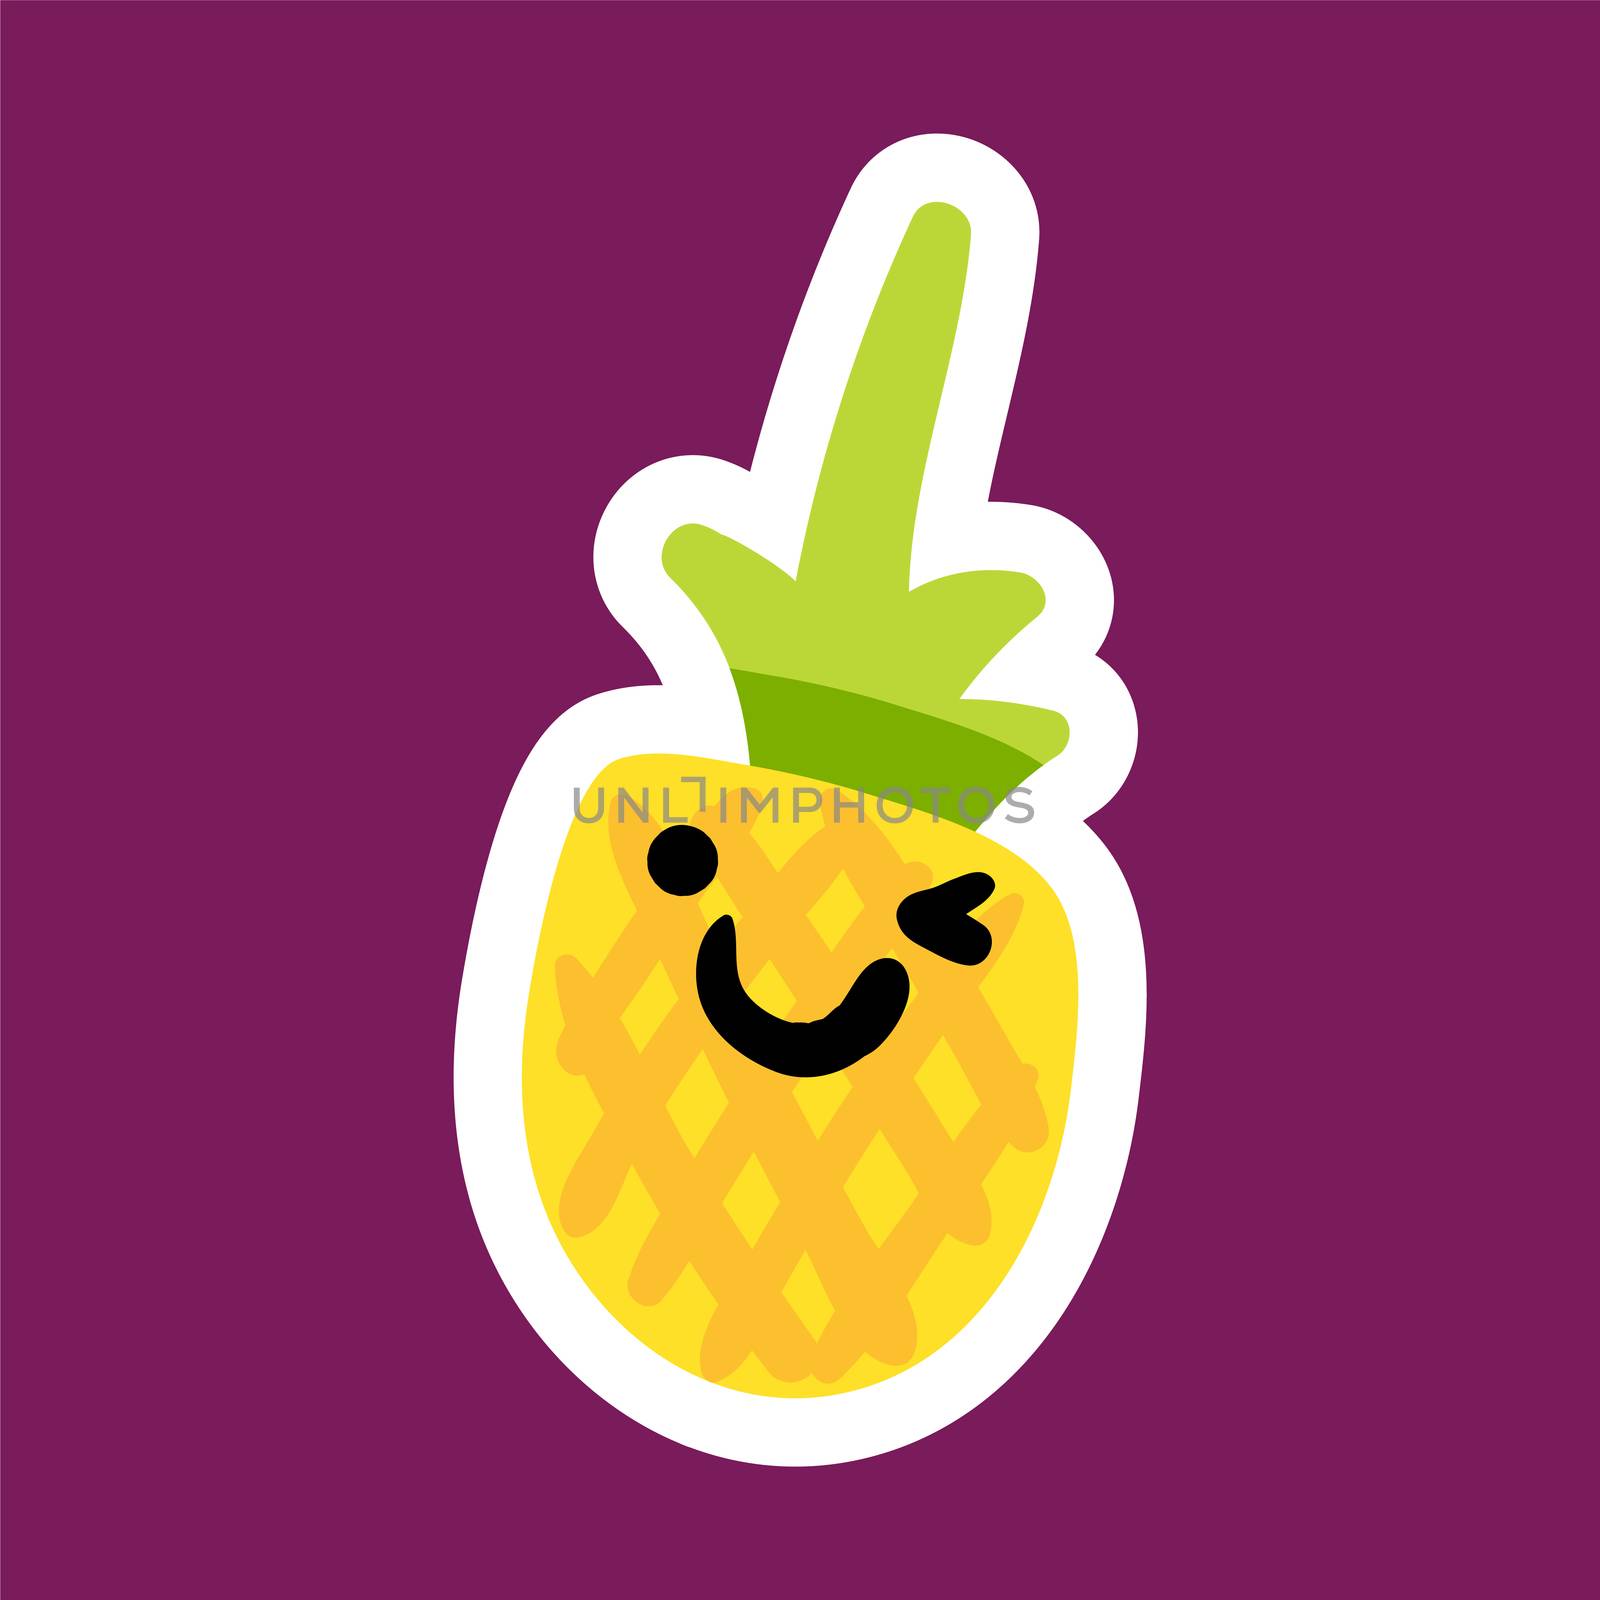 Sticker with pineapple. Cheerful smiling fruit. Symbol of summer. Dessert and sweet food sign. Fashionable patch. Vector